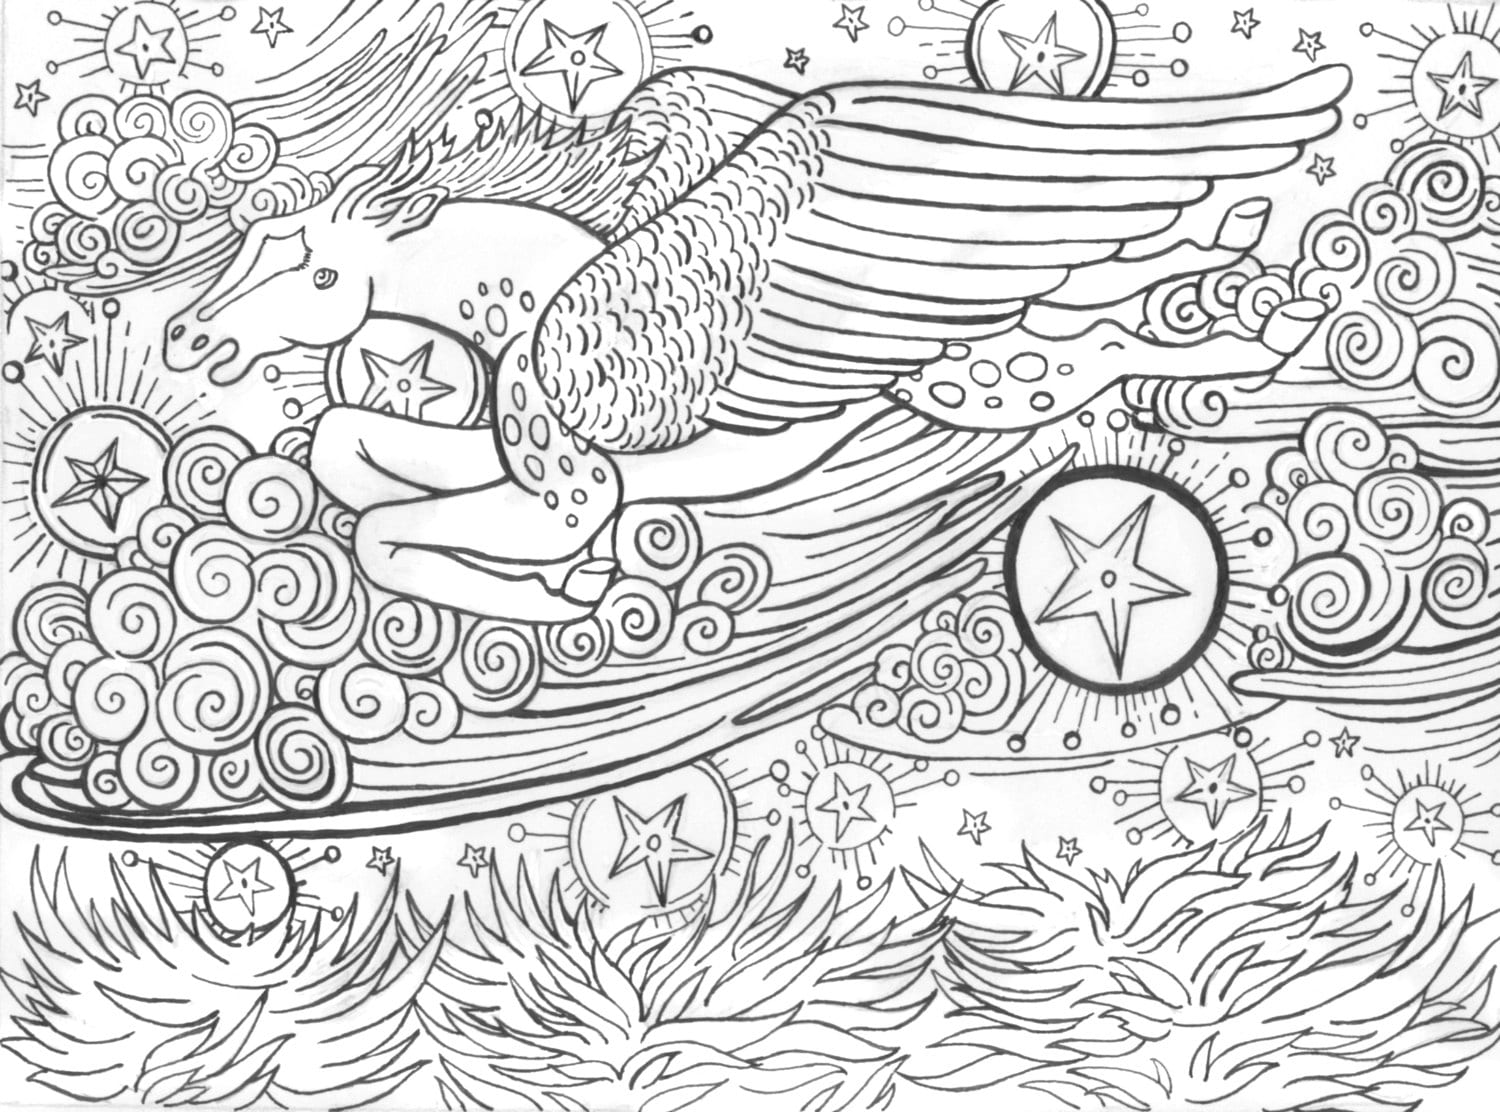 Download Coloring Book Page Winged Horse With Stars printable pdf